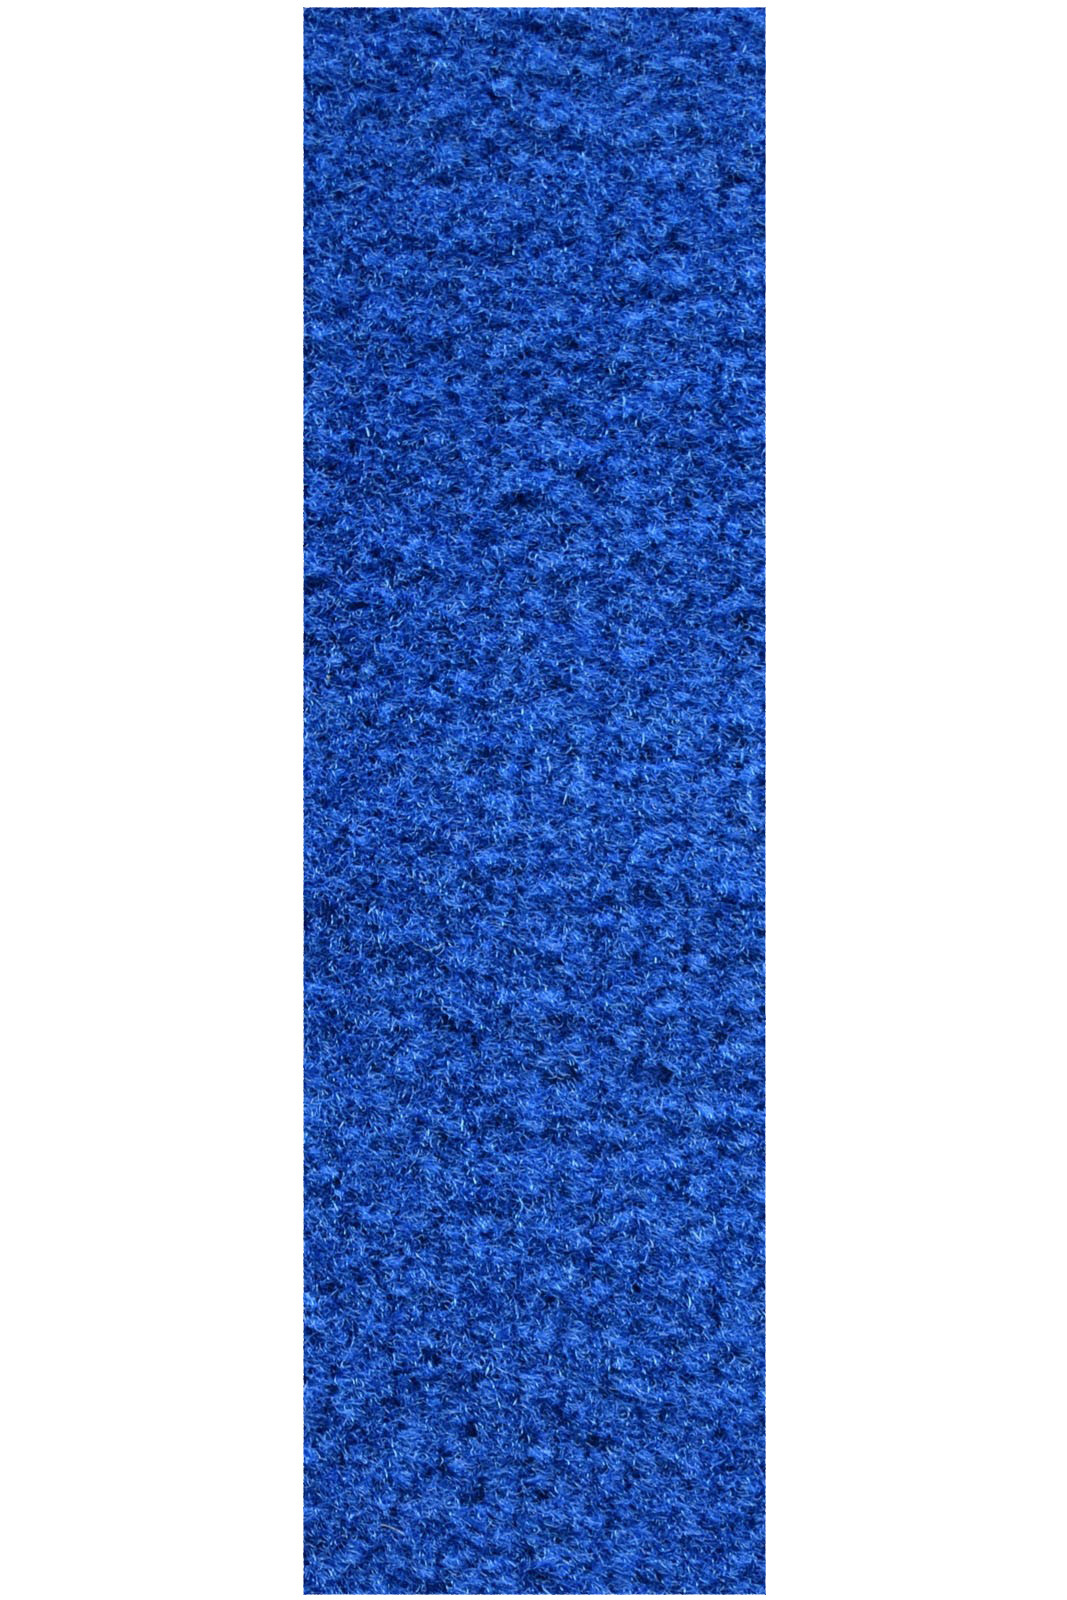 Commercial Indoor/Outdoor Blue Custom Size Runner 2'6" x28' - Area Rug with Rubber Marine Backing for Patio, Porch, Deck, Boat, Basement or Garage with Premium Bound Polyester Edges - image 1 of 1